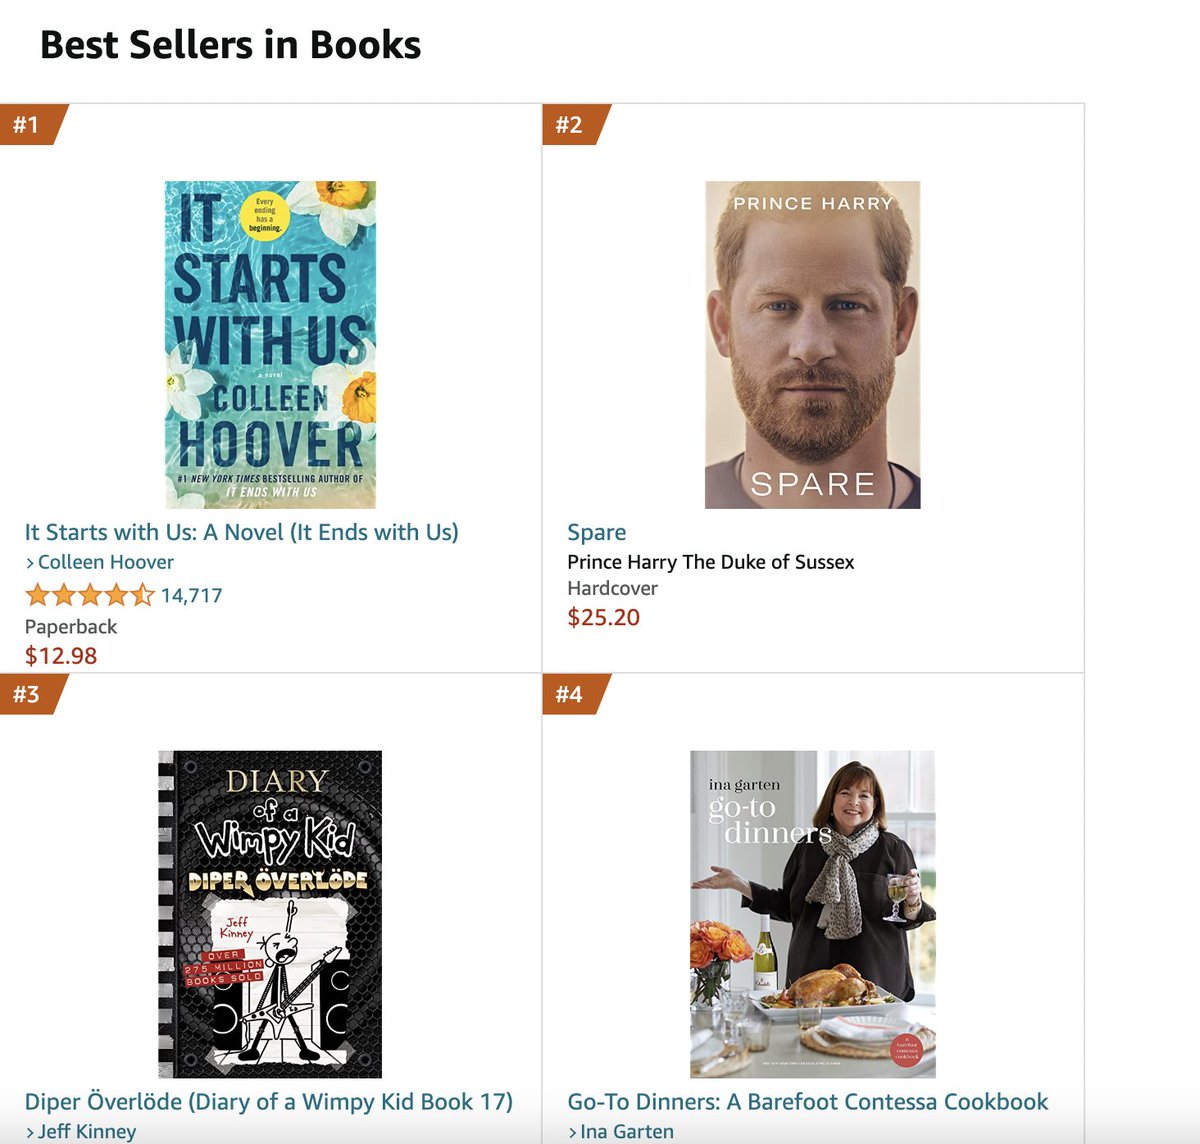 Just checked Amazon and it appears Prince Harry's memoir Spare is now at #2.